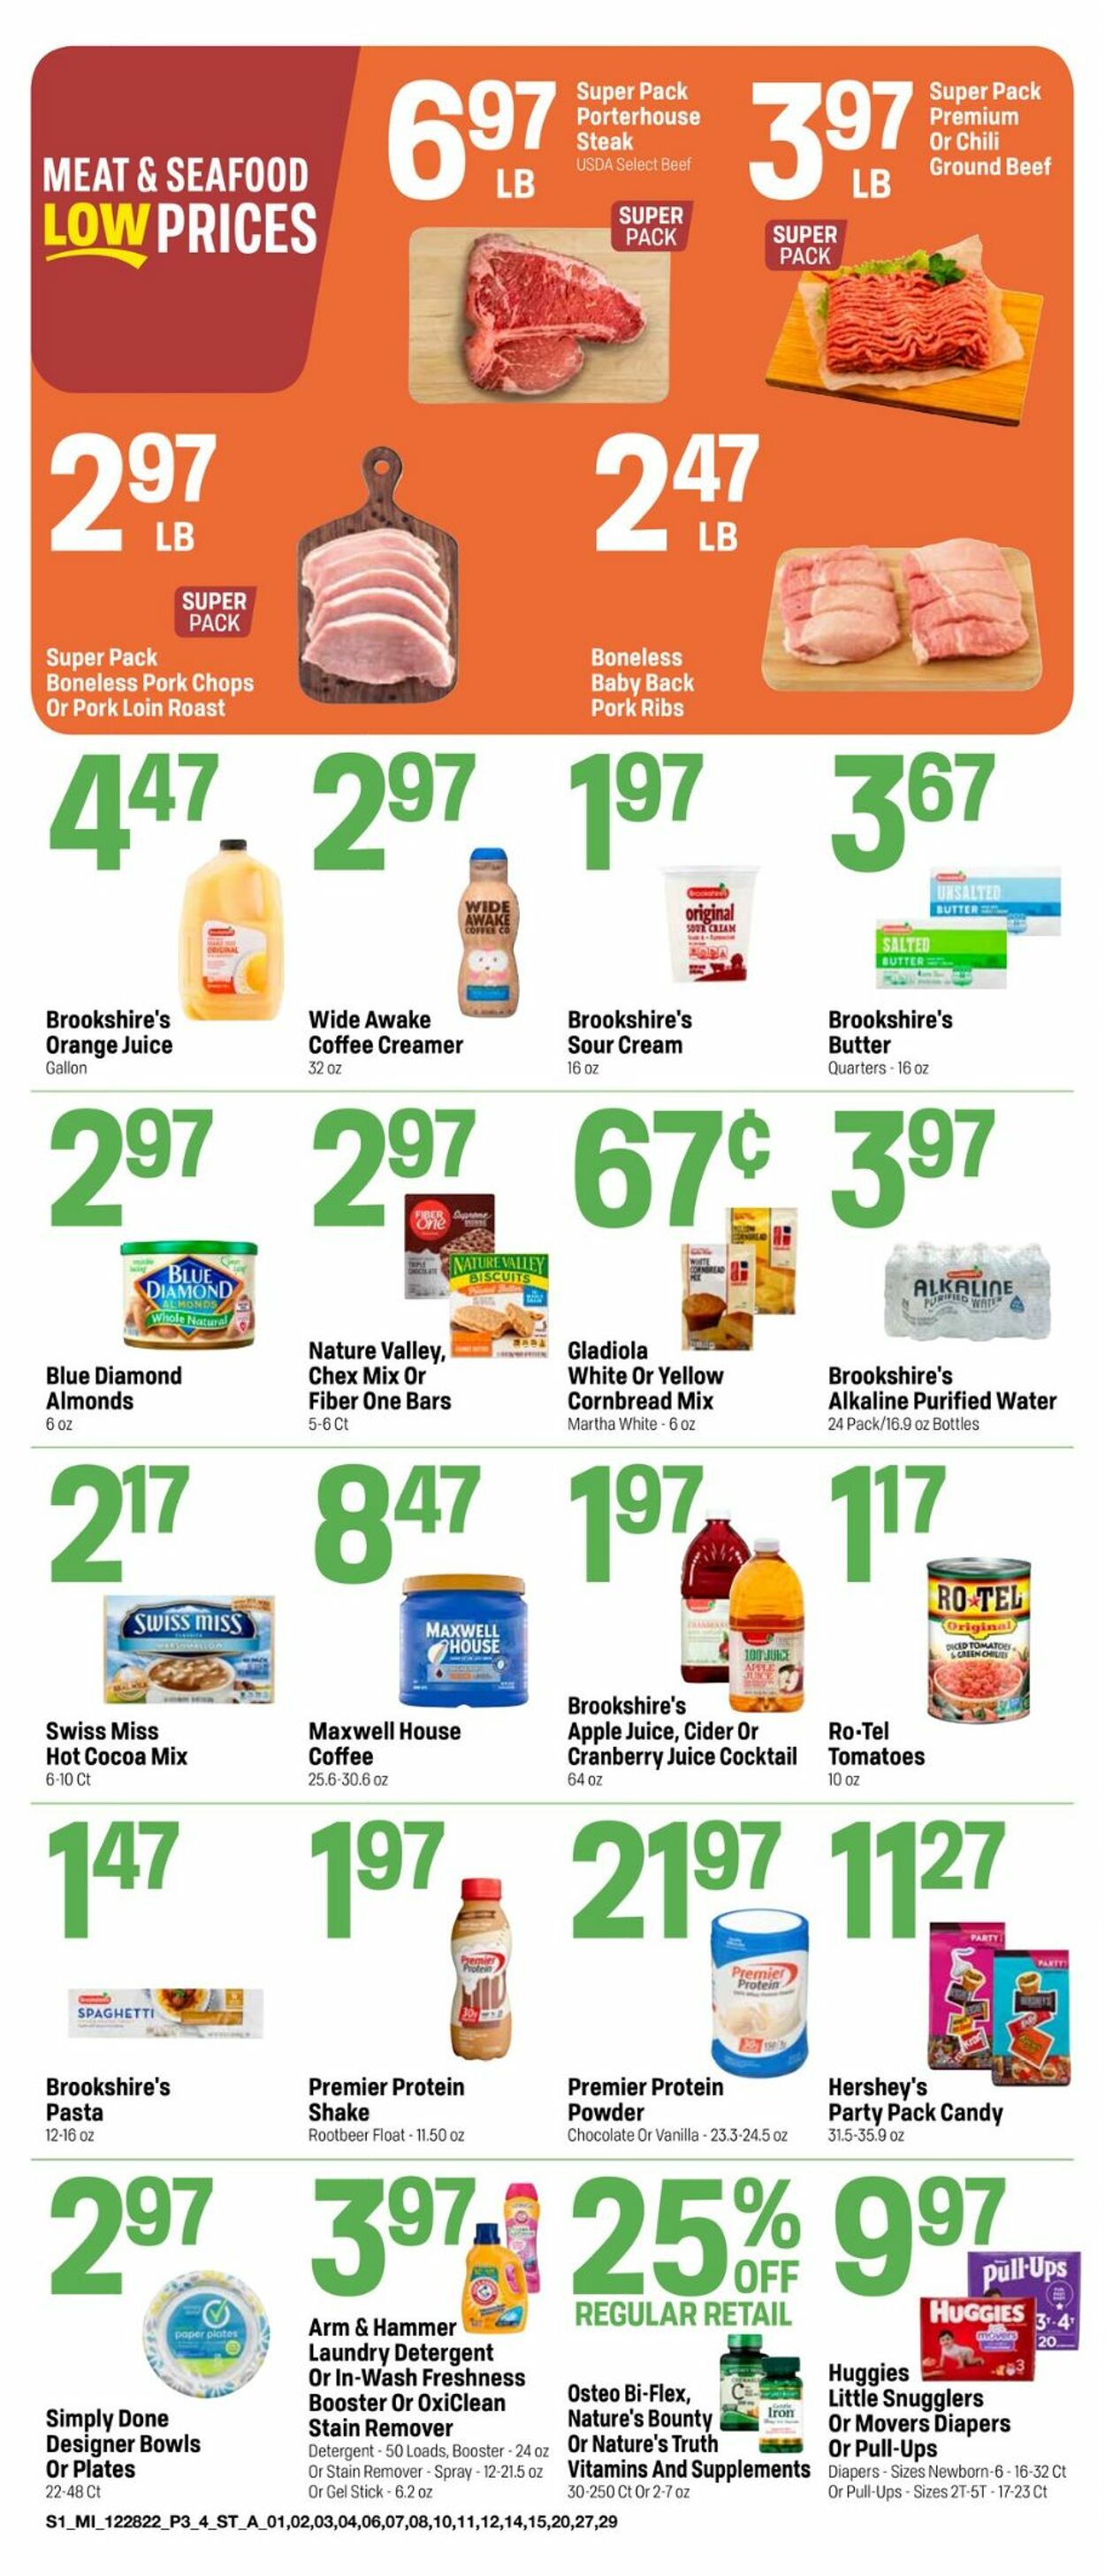 Catalogue Super 1 Foods from 12/28/2022